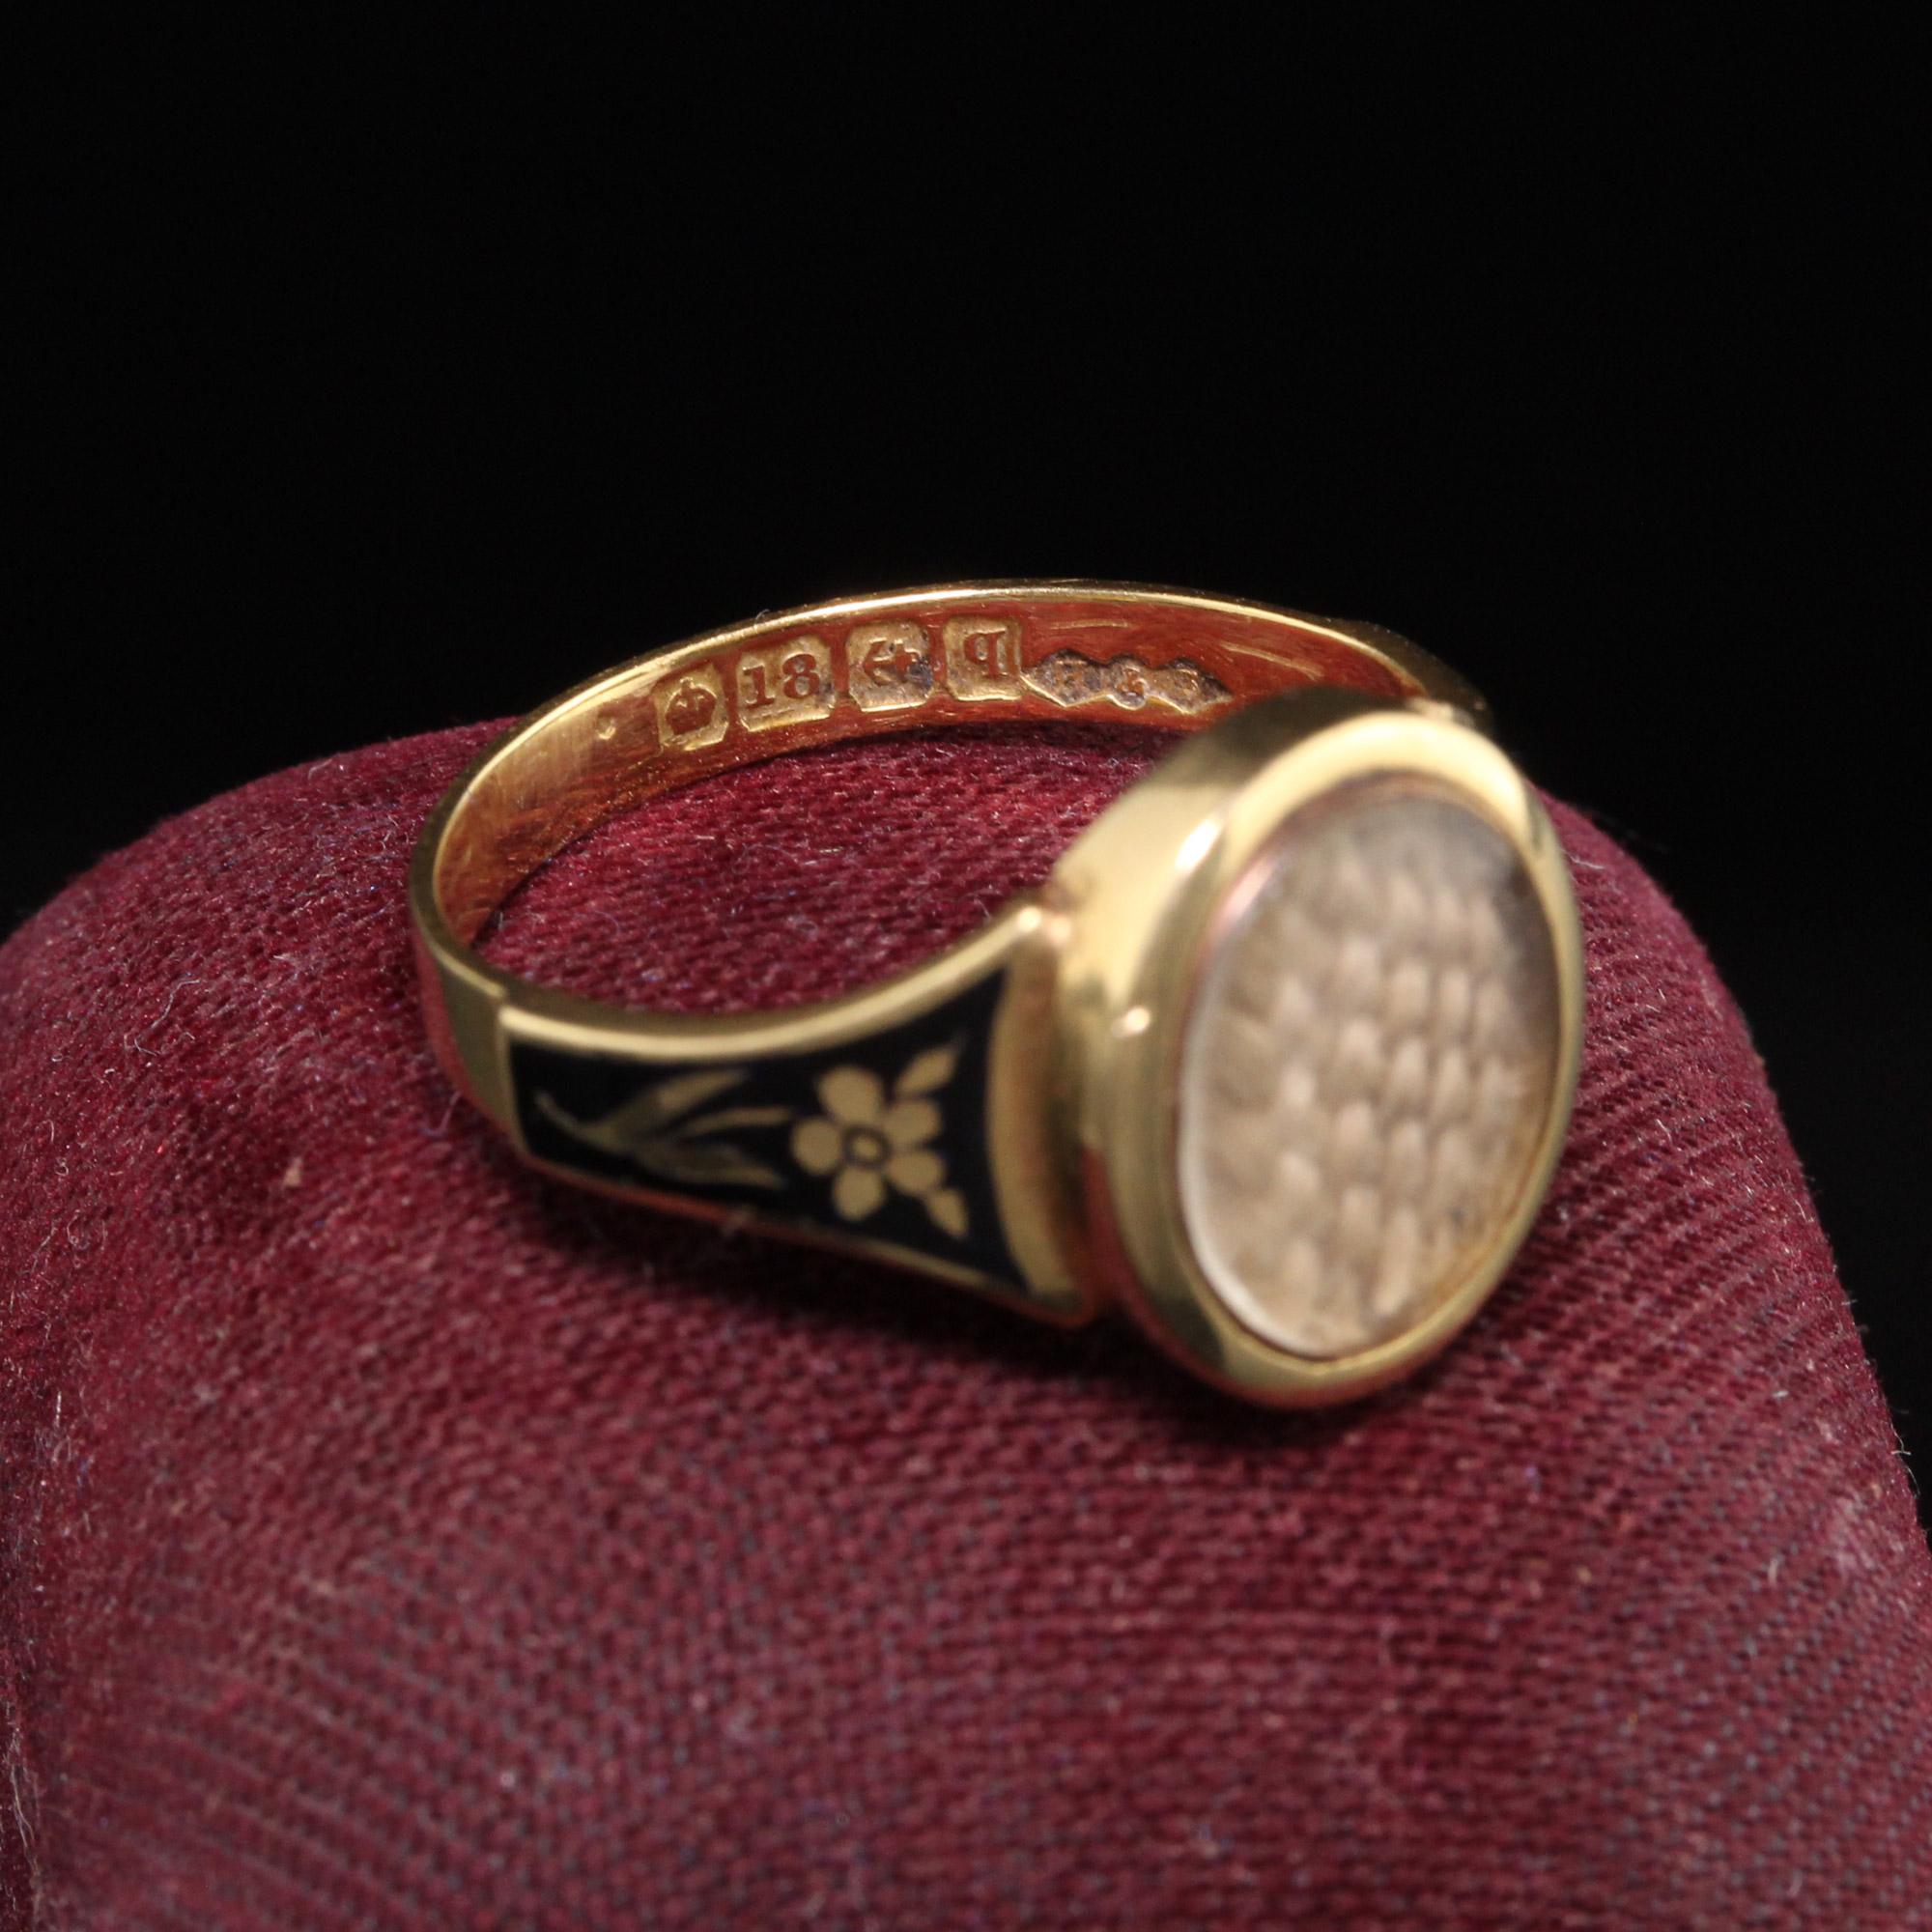 Beautiful Antique Victorian 18K Yellow Gold Enamel Hair Mourning Ring. This amazing ring has pristine enameling and the hair is still intact inside the glass. It has flower designs on the side of the ring without any damage which is rare. The inside